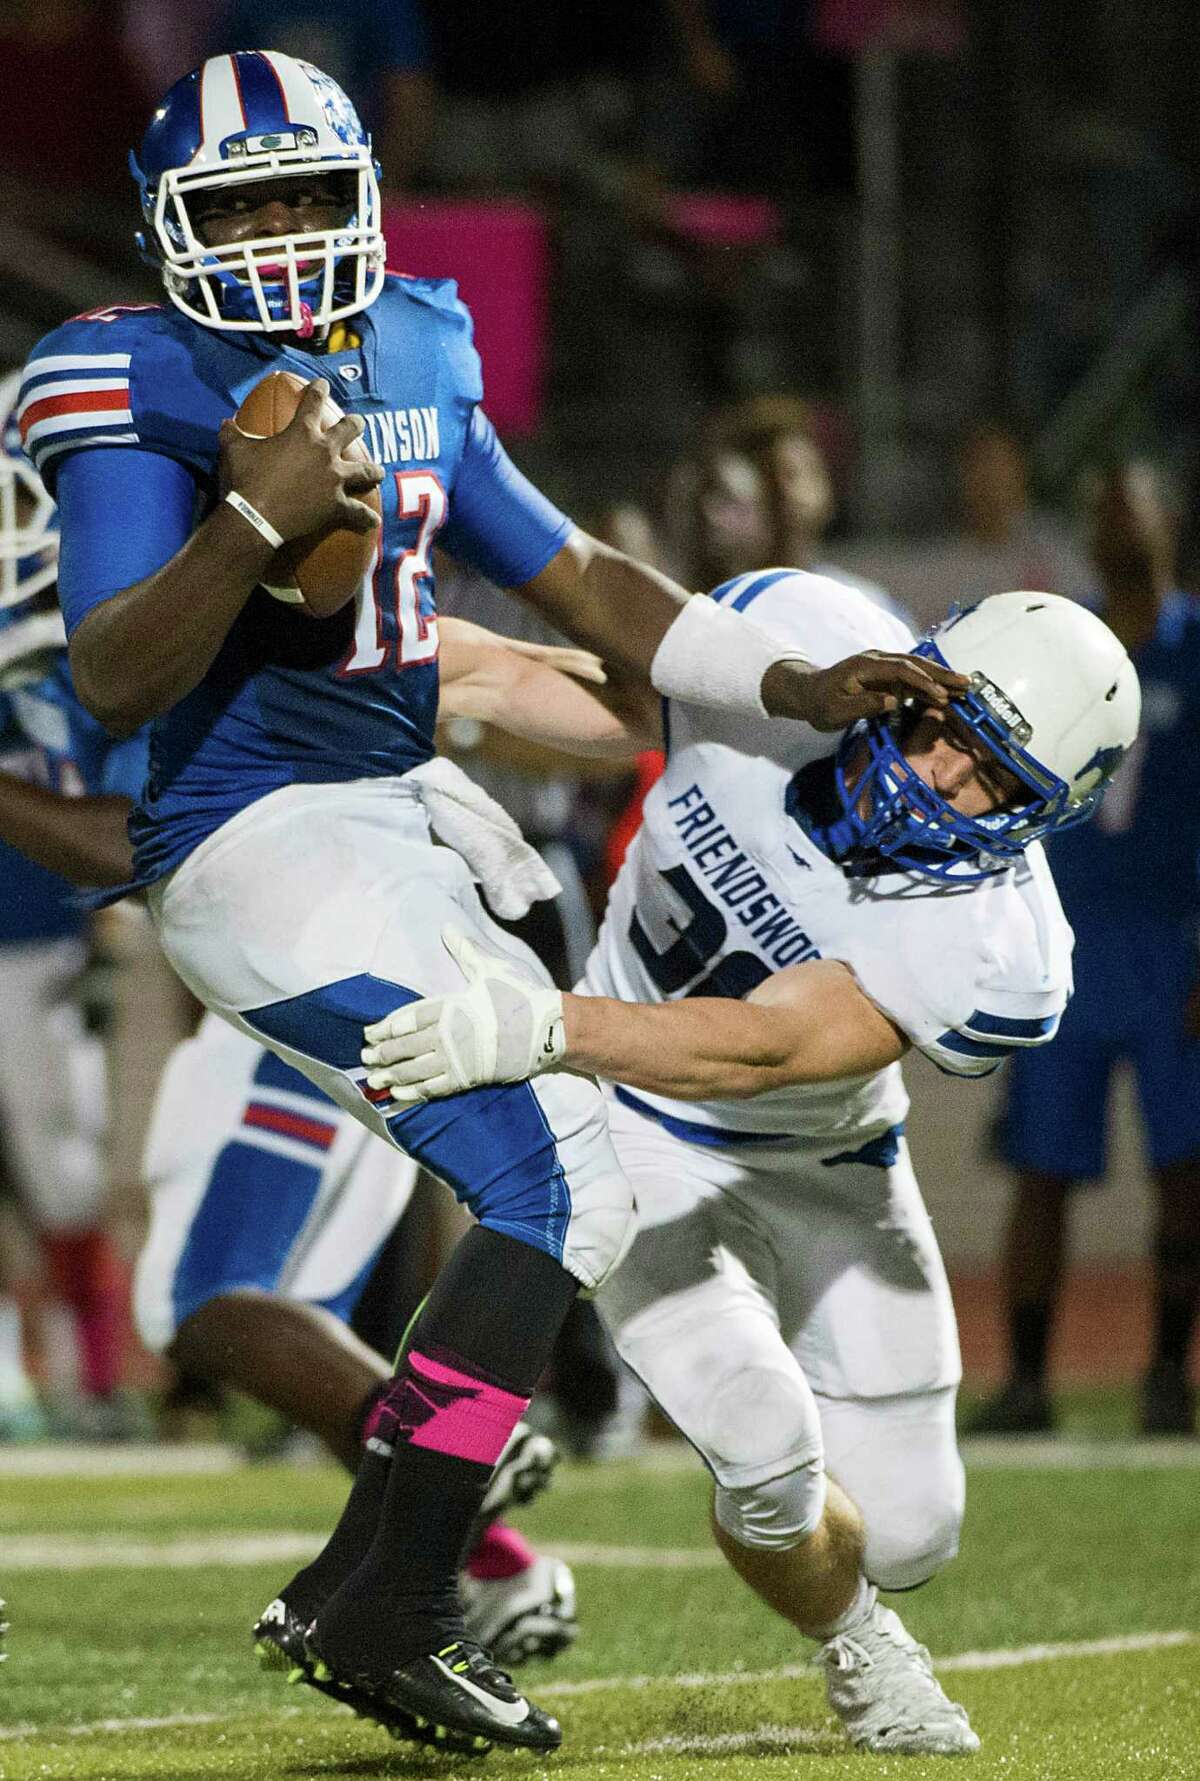 Dickinson Stays Undefeated With Defensive Win Over Friendswood 